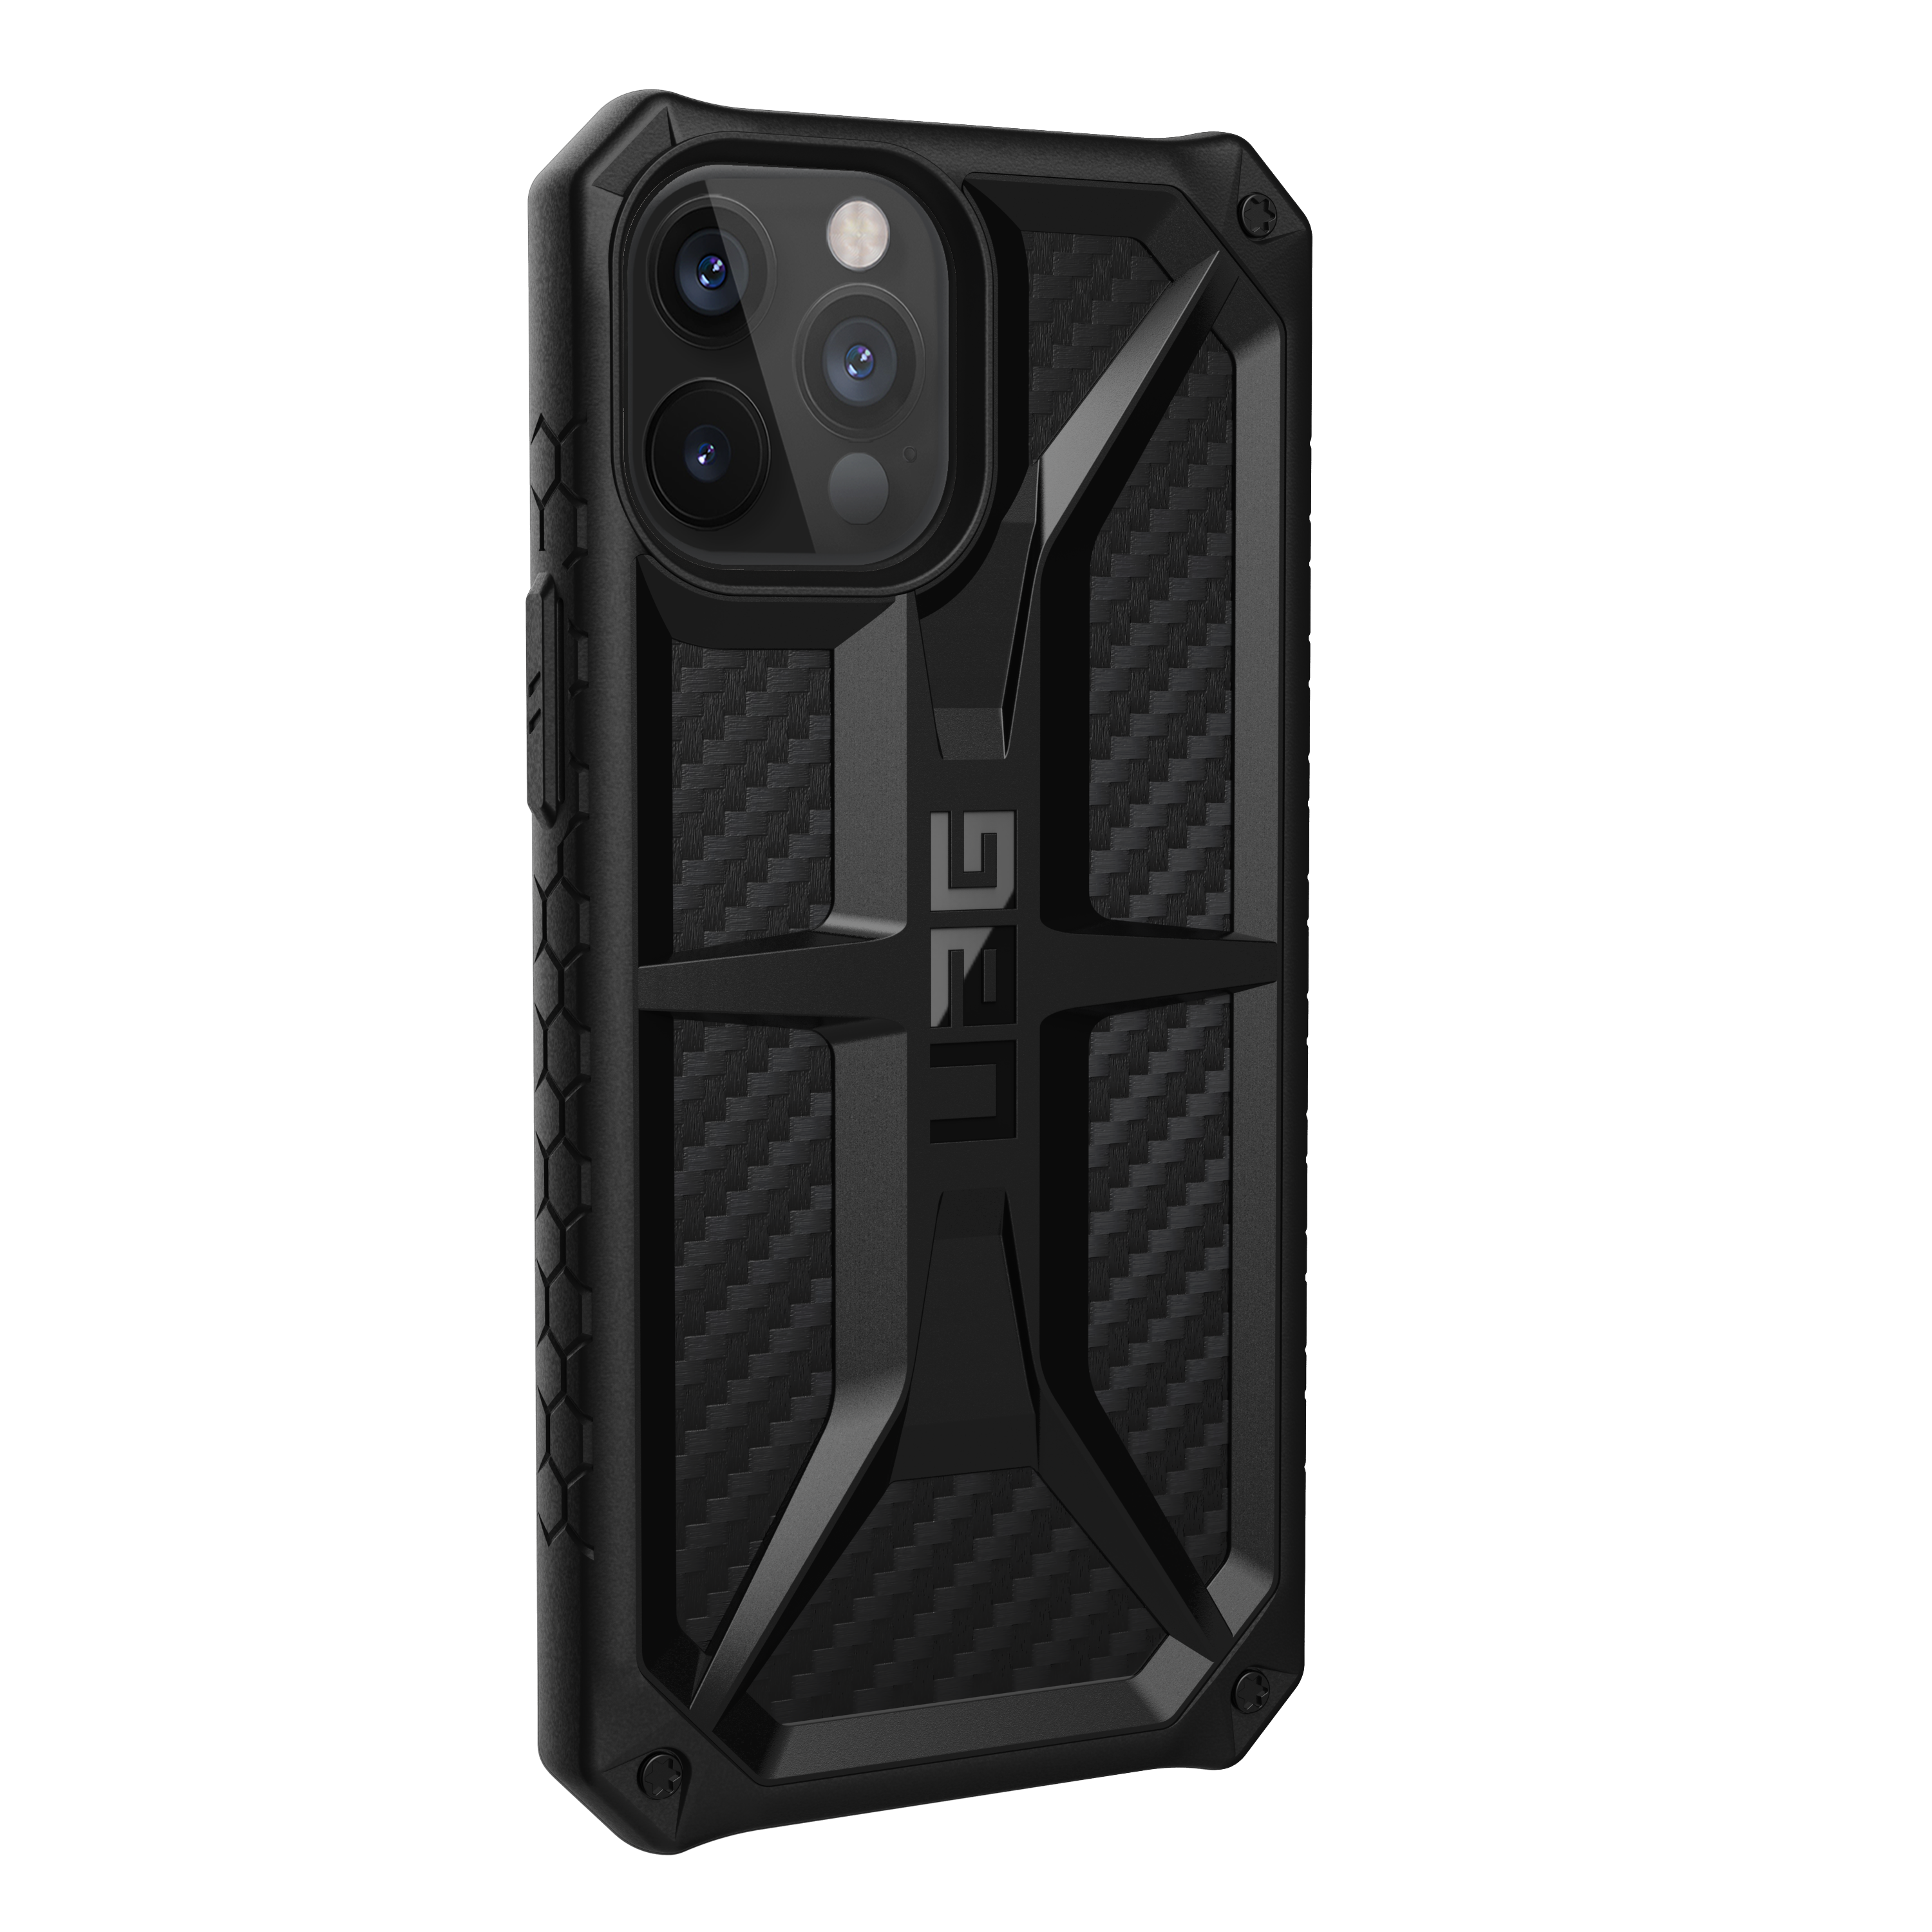 Monarch Series iPhone 12 Pro Max 5G Case